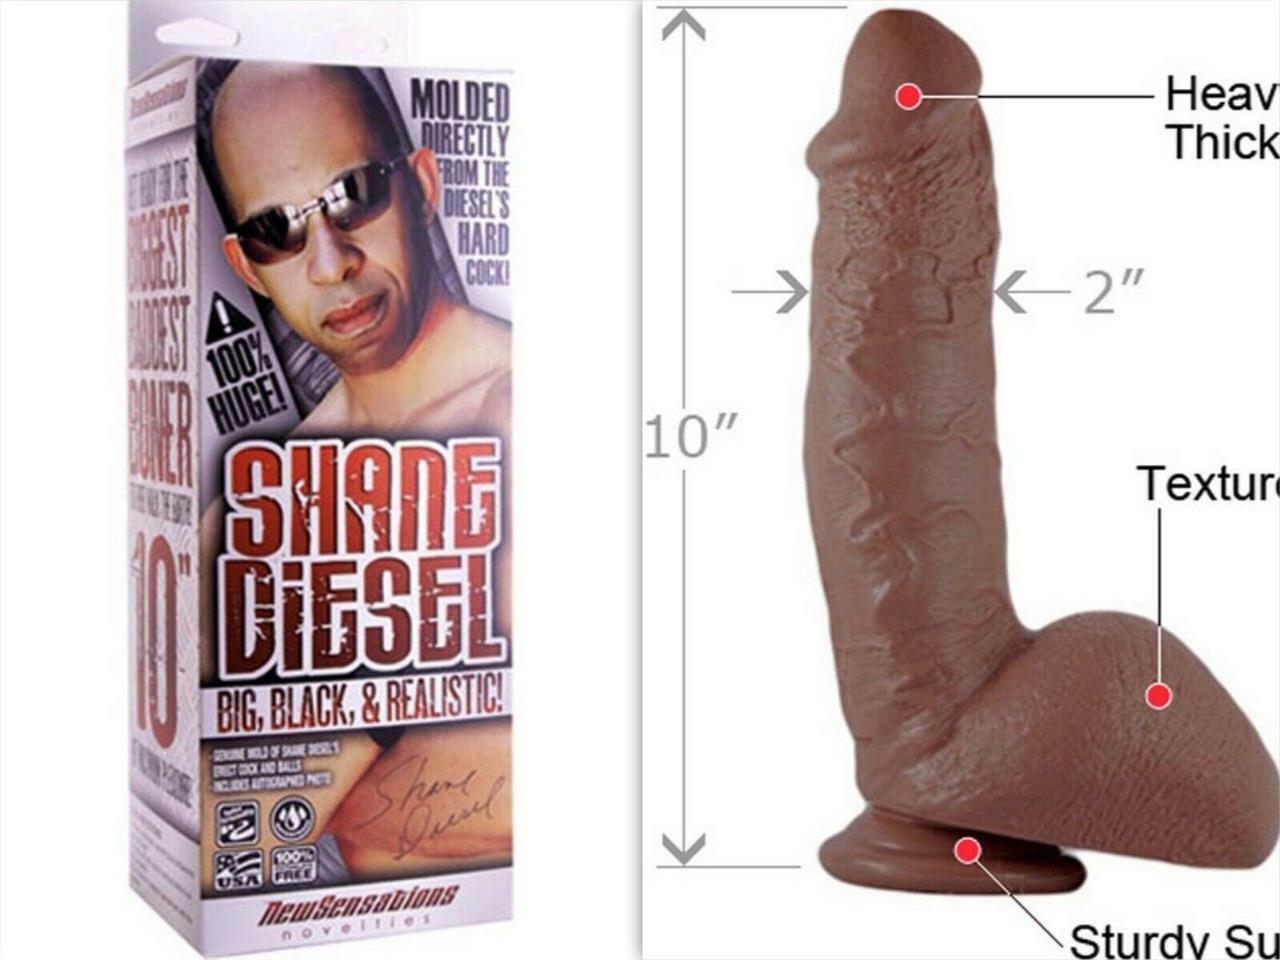 bryn oreilly recommends shane diesel cock pics pic